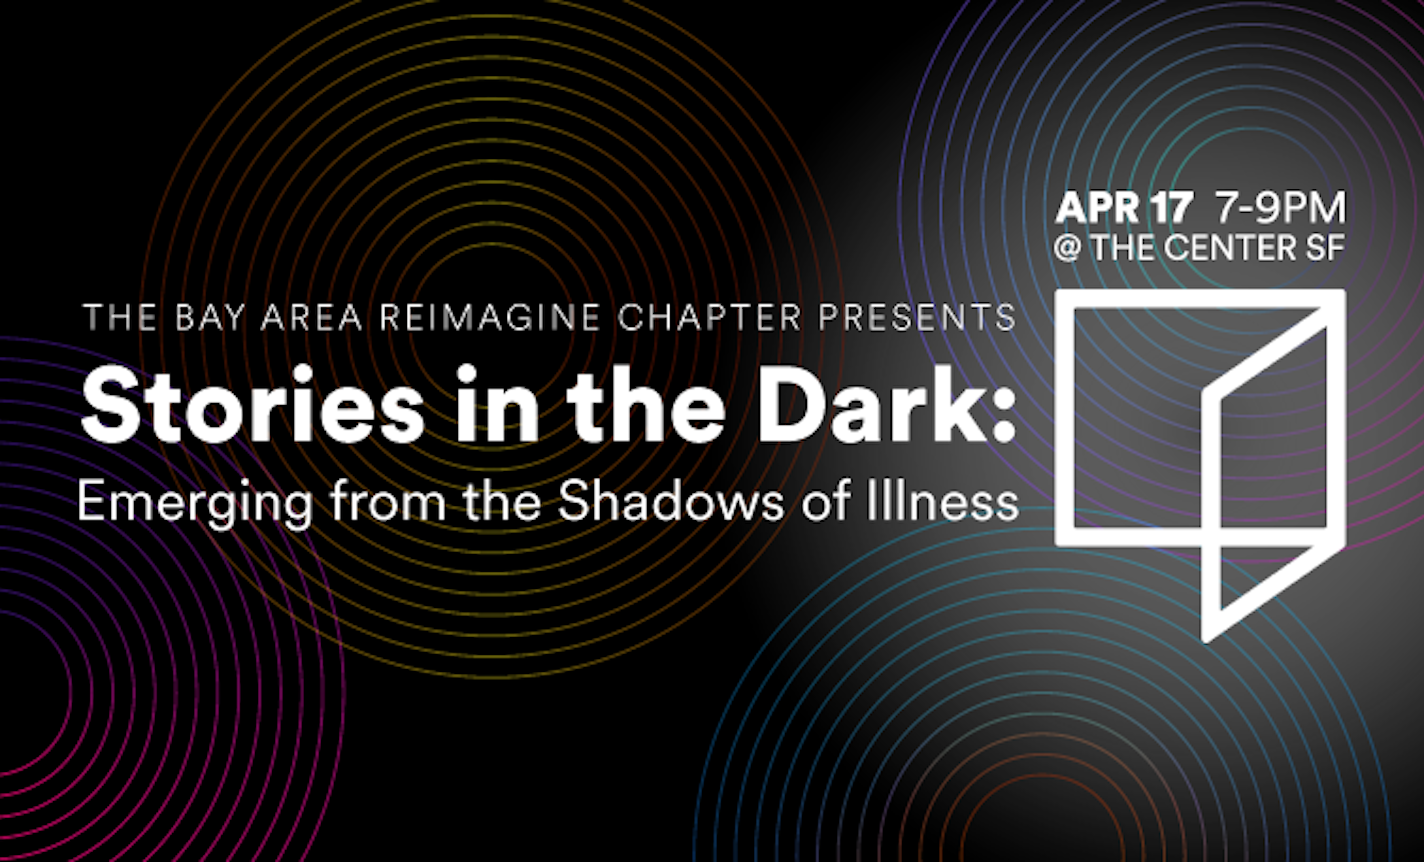 Stories in the Dark: Emerging from the Shadows of Illness